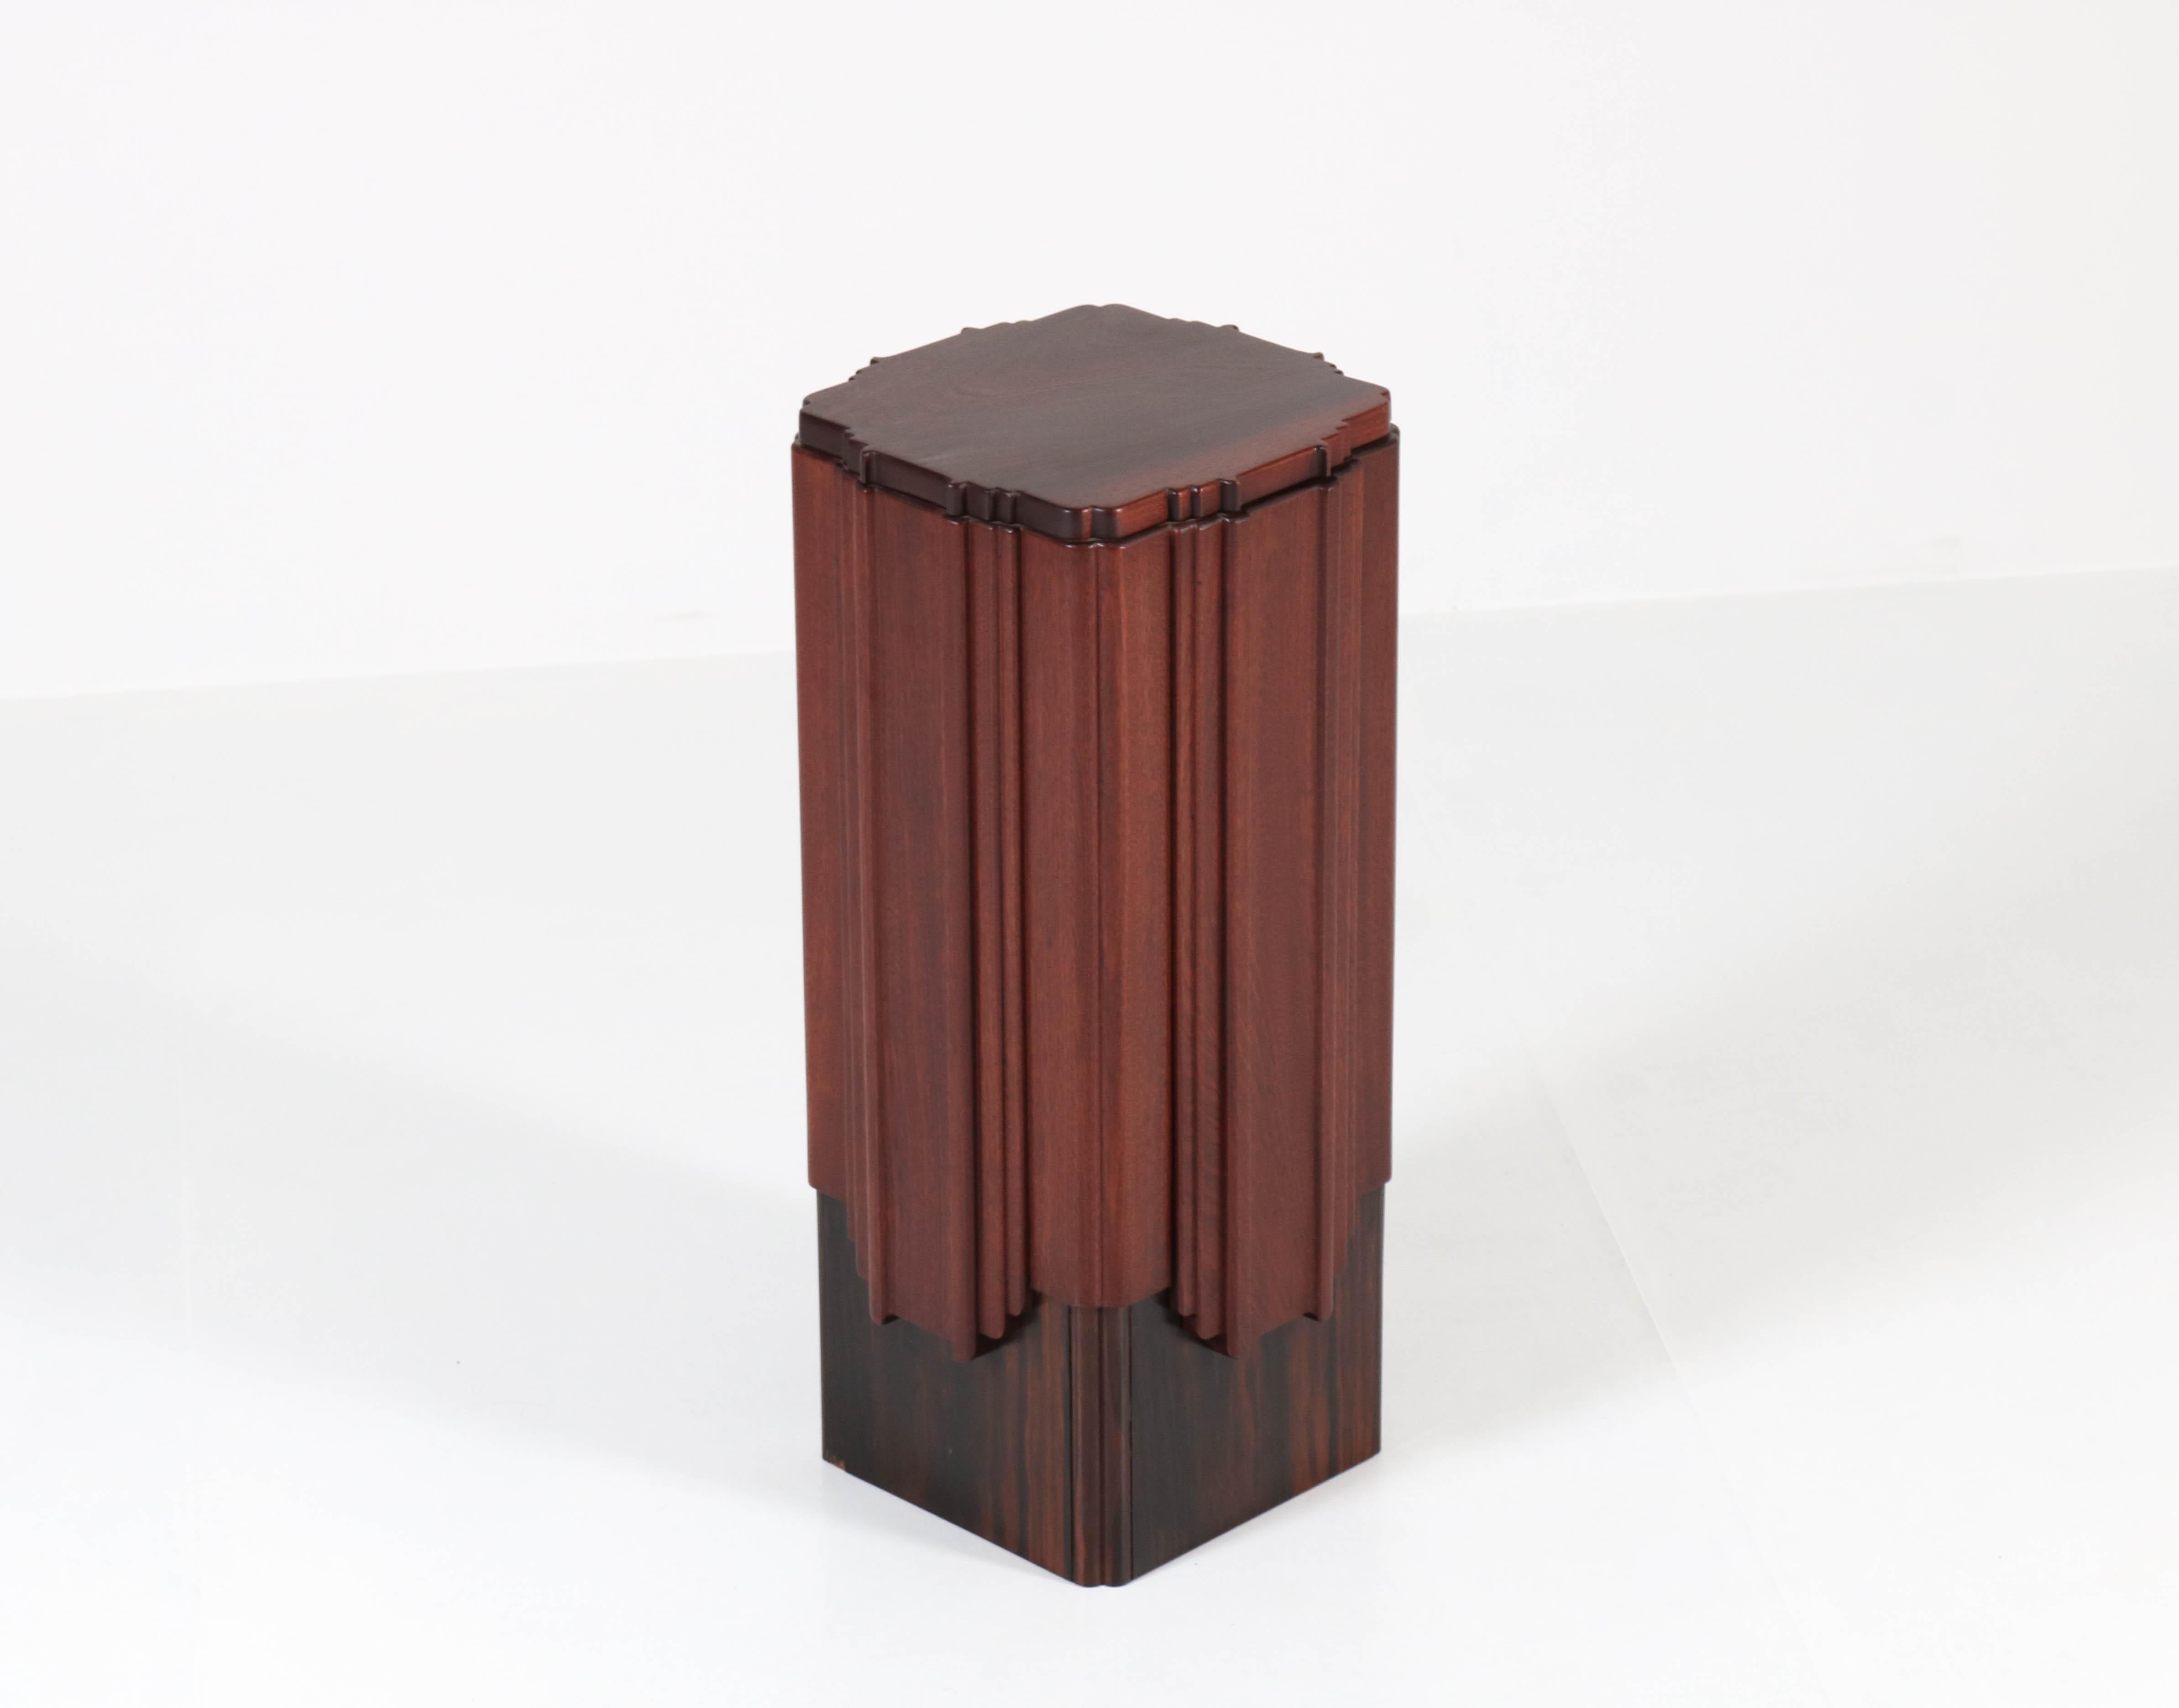 Offered by Amsterdam Modernism:
Stunning and rare Art Deco Amsterdam School pedestal.
Attributed to Hildo Krop.
Striking Dutch design from the twenties.
Solid mahogany with Macassar ebony veneer.
In very good condition with minor wear consistent